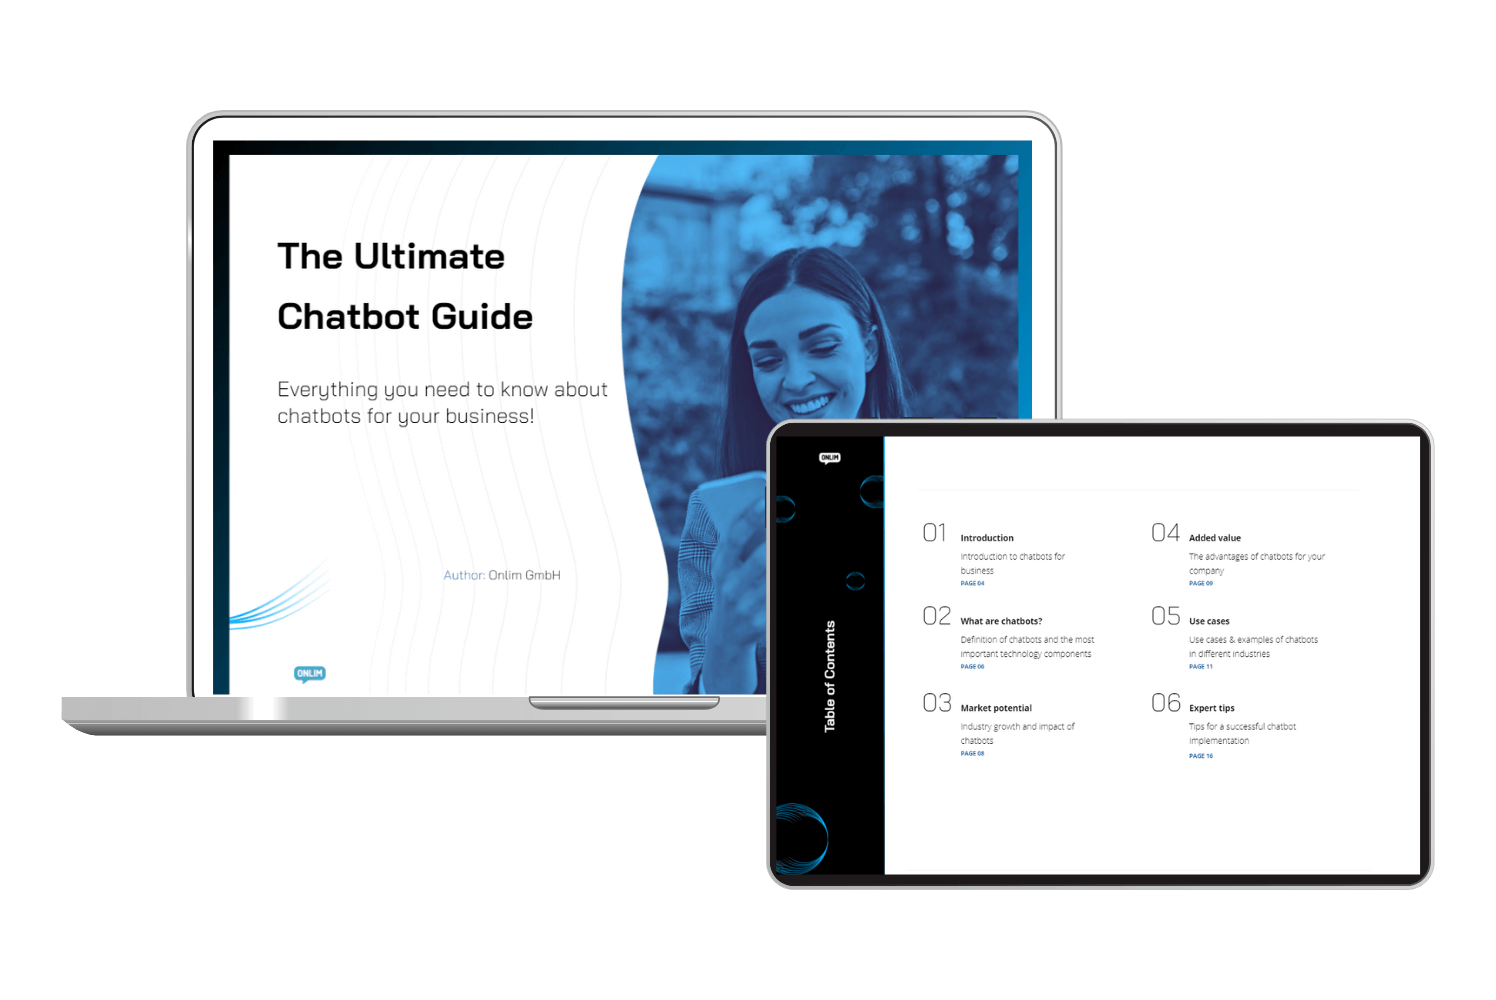 The Ultimate Chatbot Guide